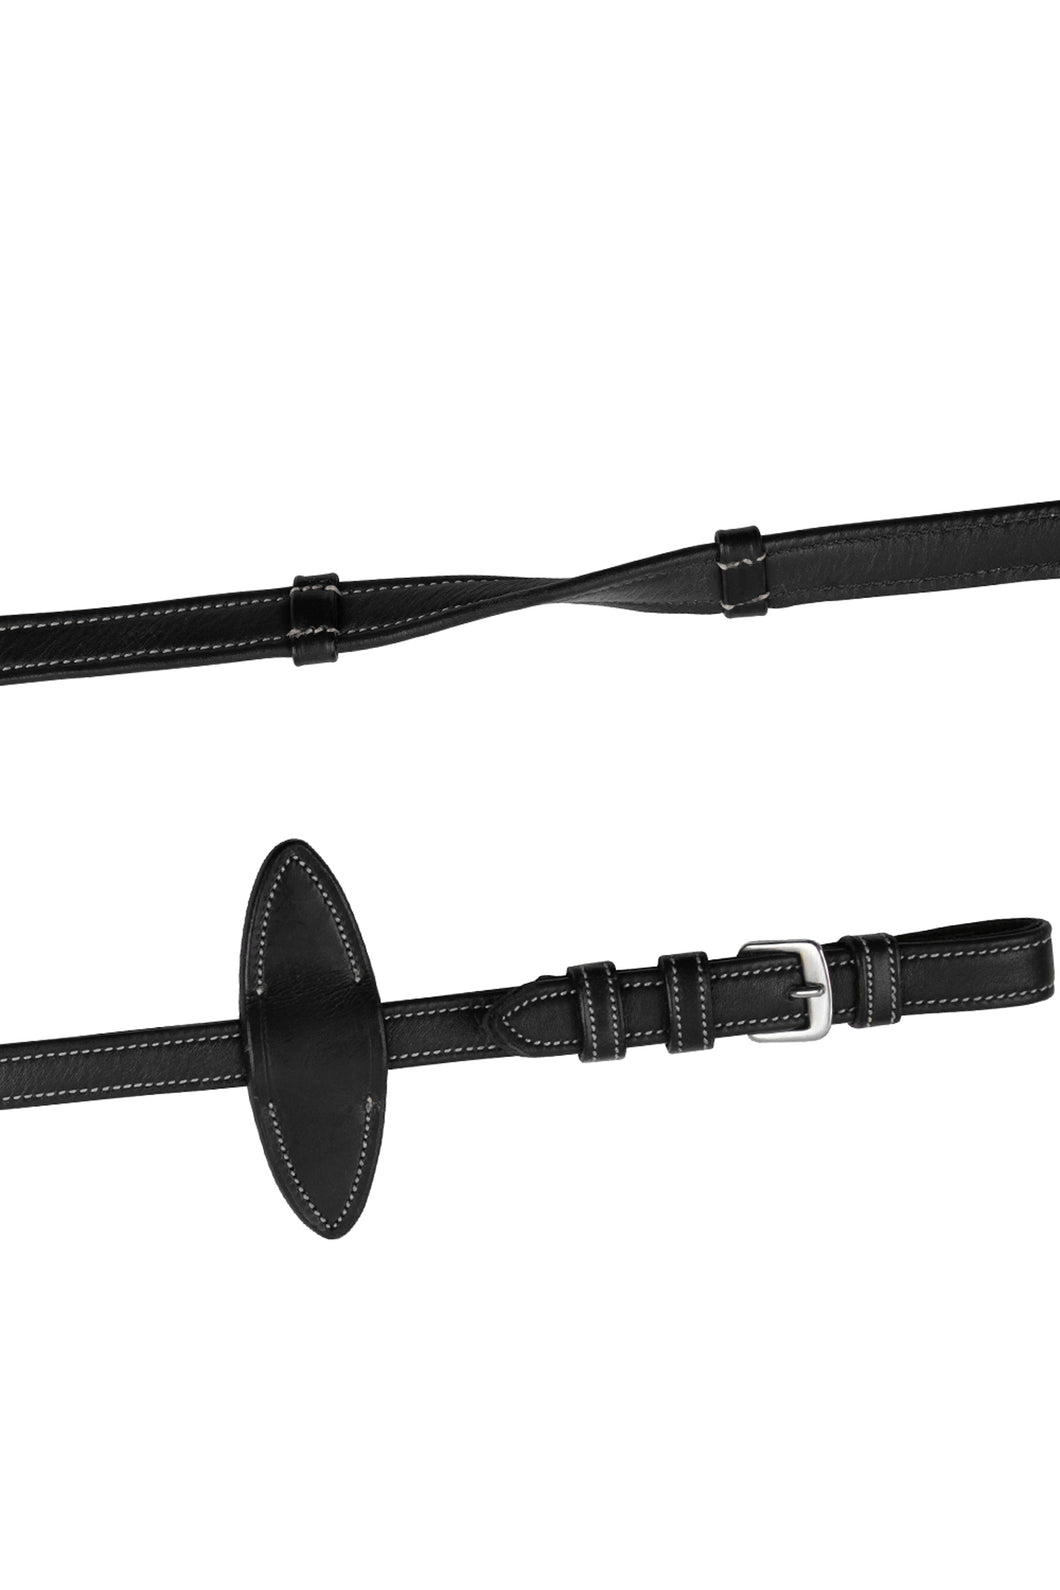 Grip Soft Leather Reins - Black/Cream with Buckles